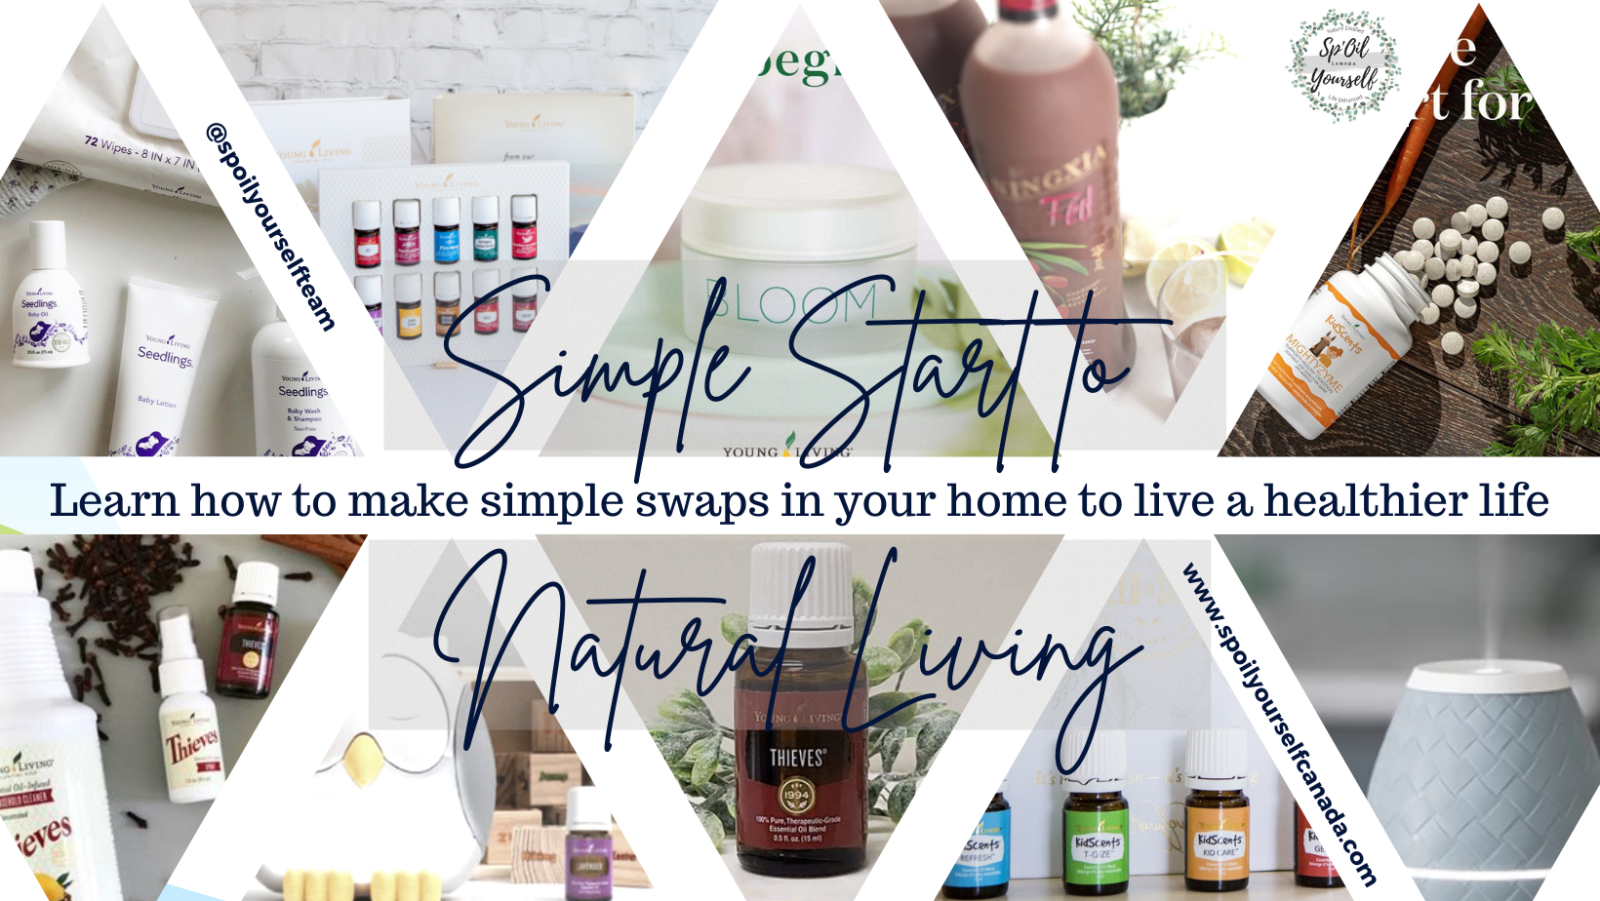 POSTPONED - Simple Steps to a Holistic Lifestyle